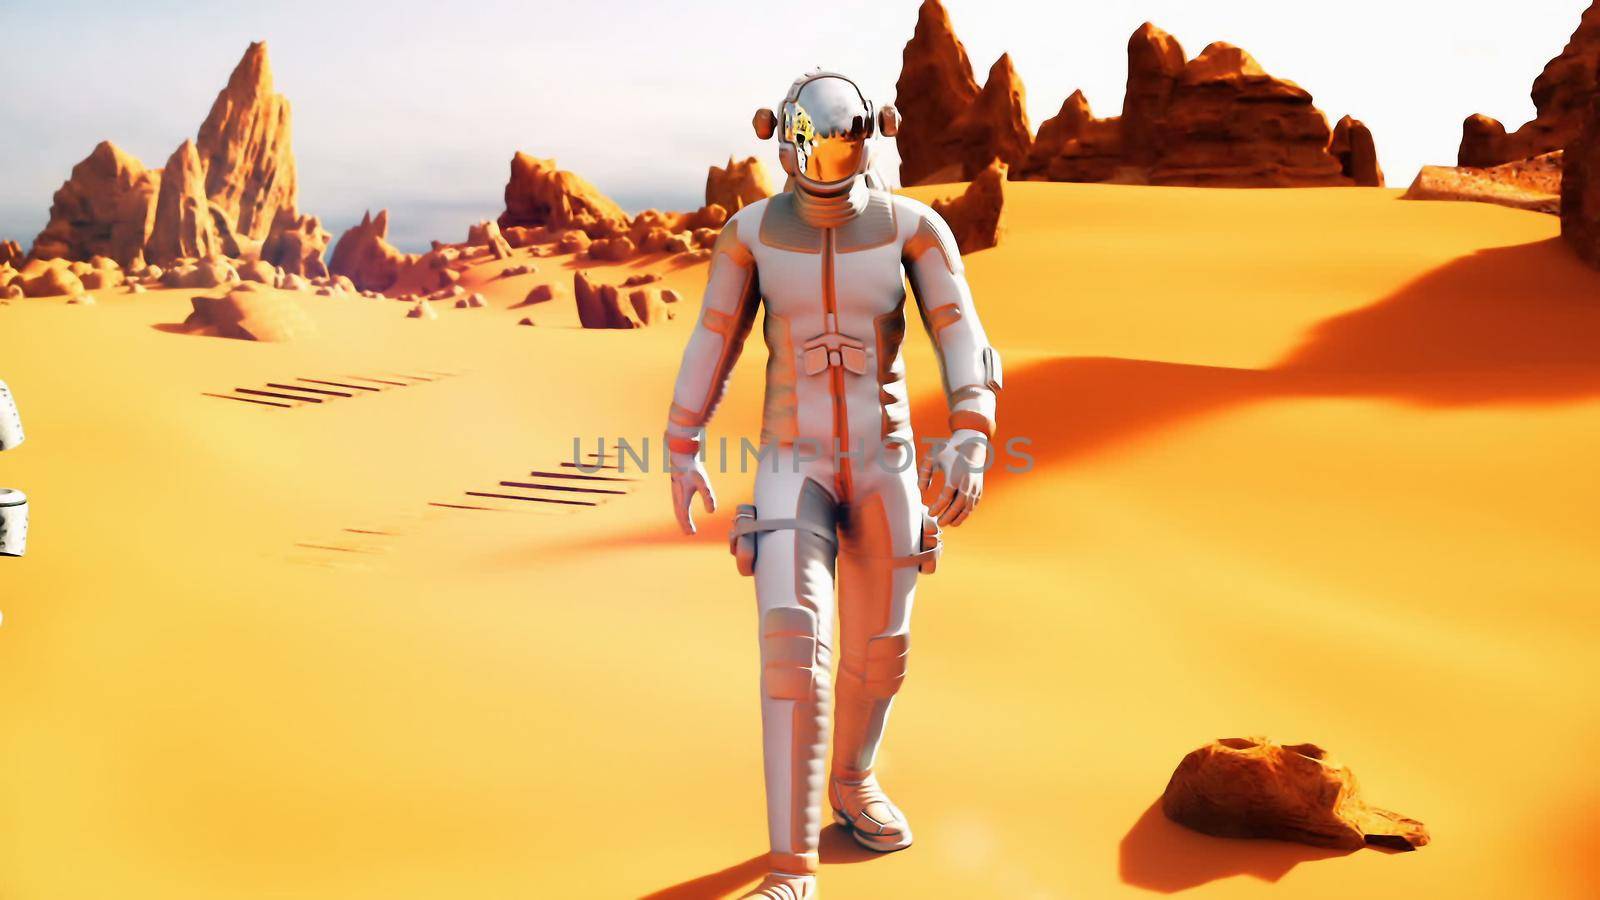 HD Astronaut on the Mars returns to his mars Rover after the exploration of planet. A futuristic concept of a colonization of Mars.